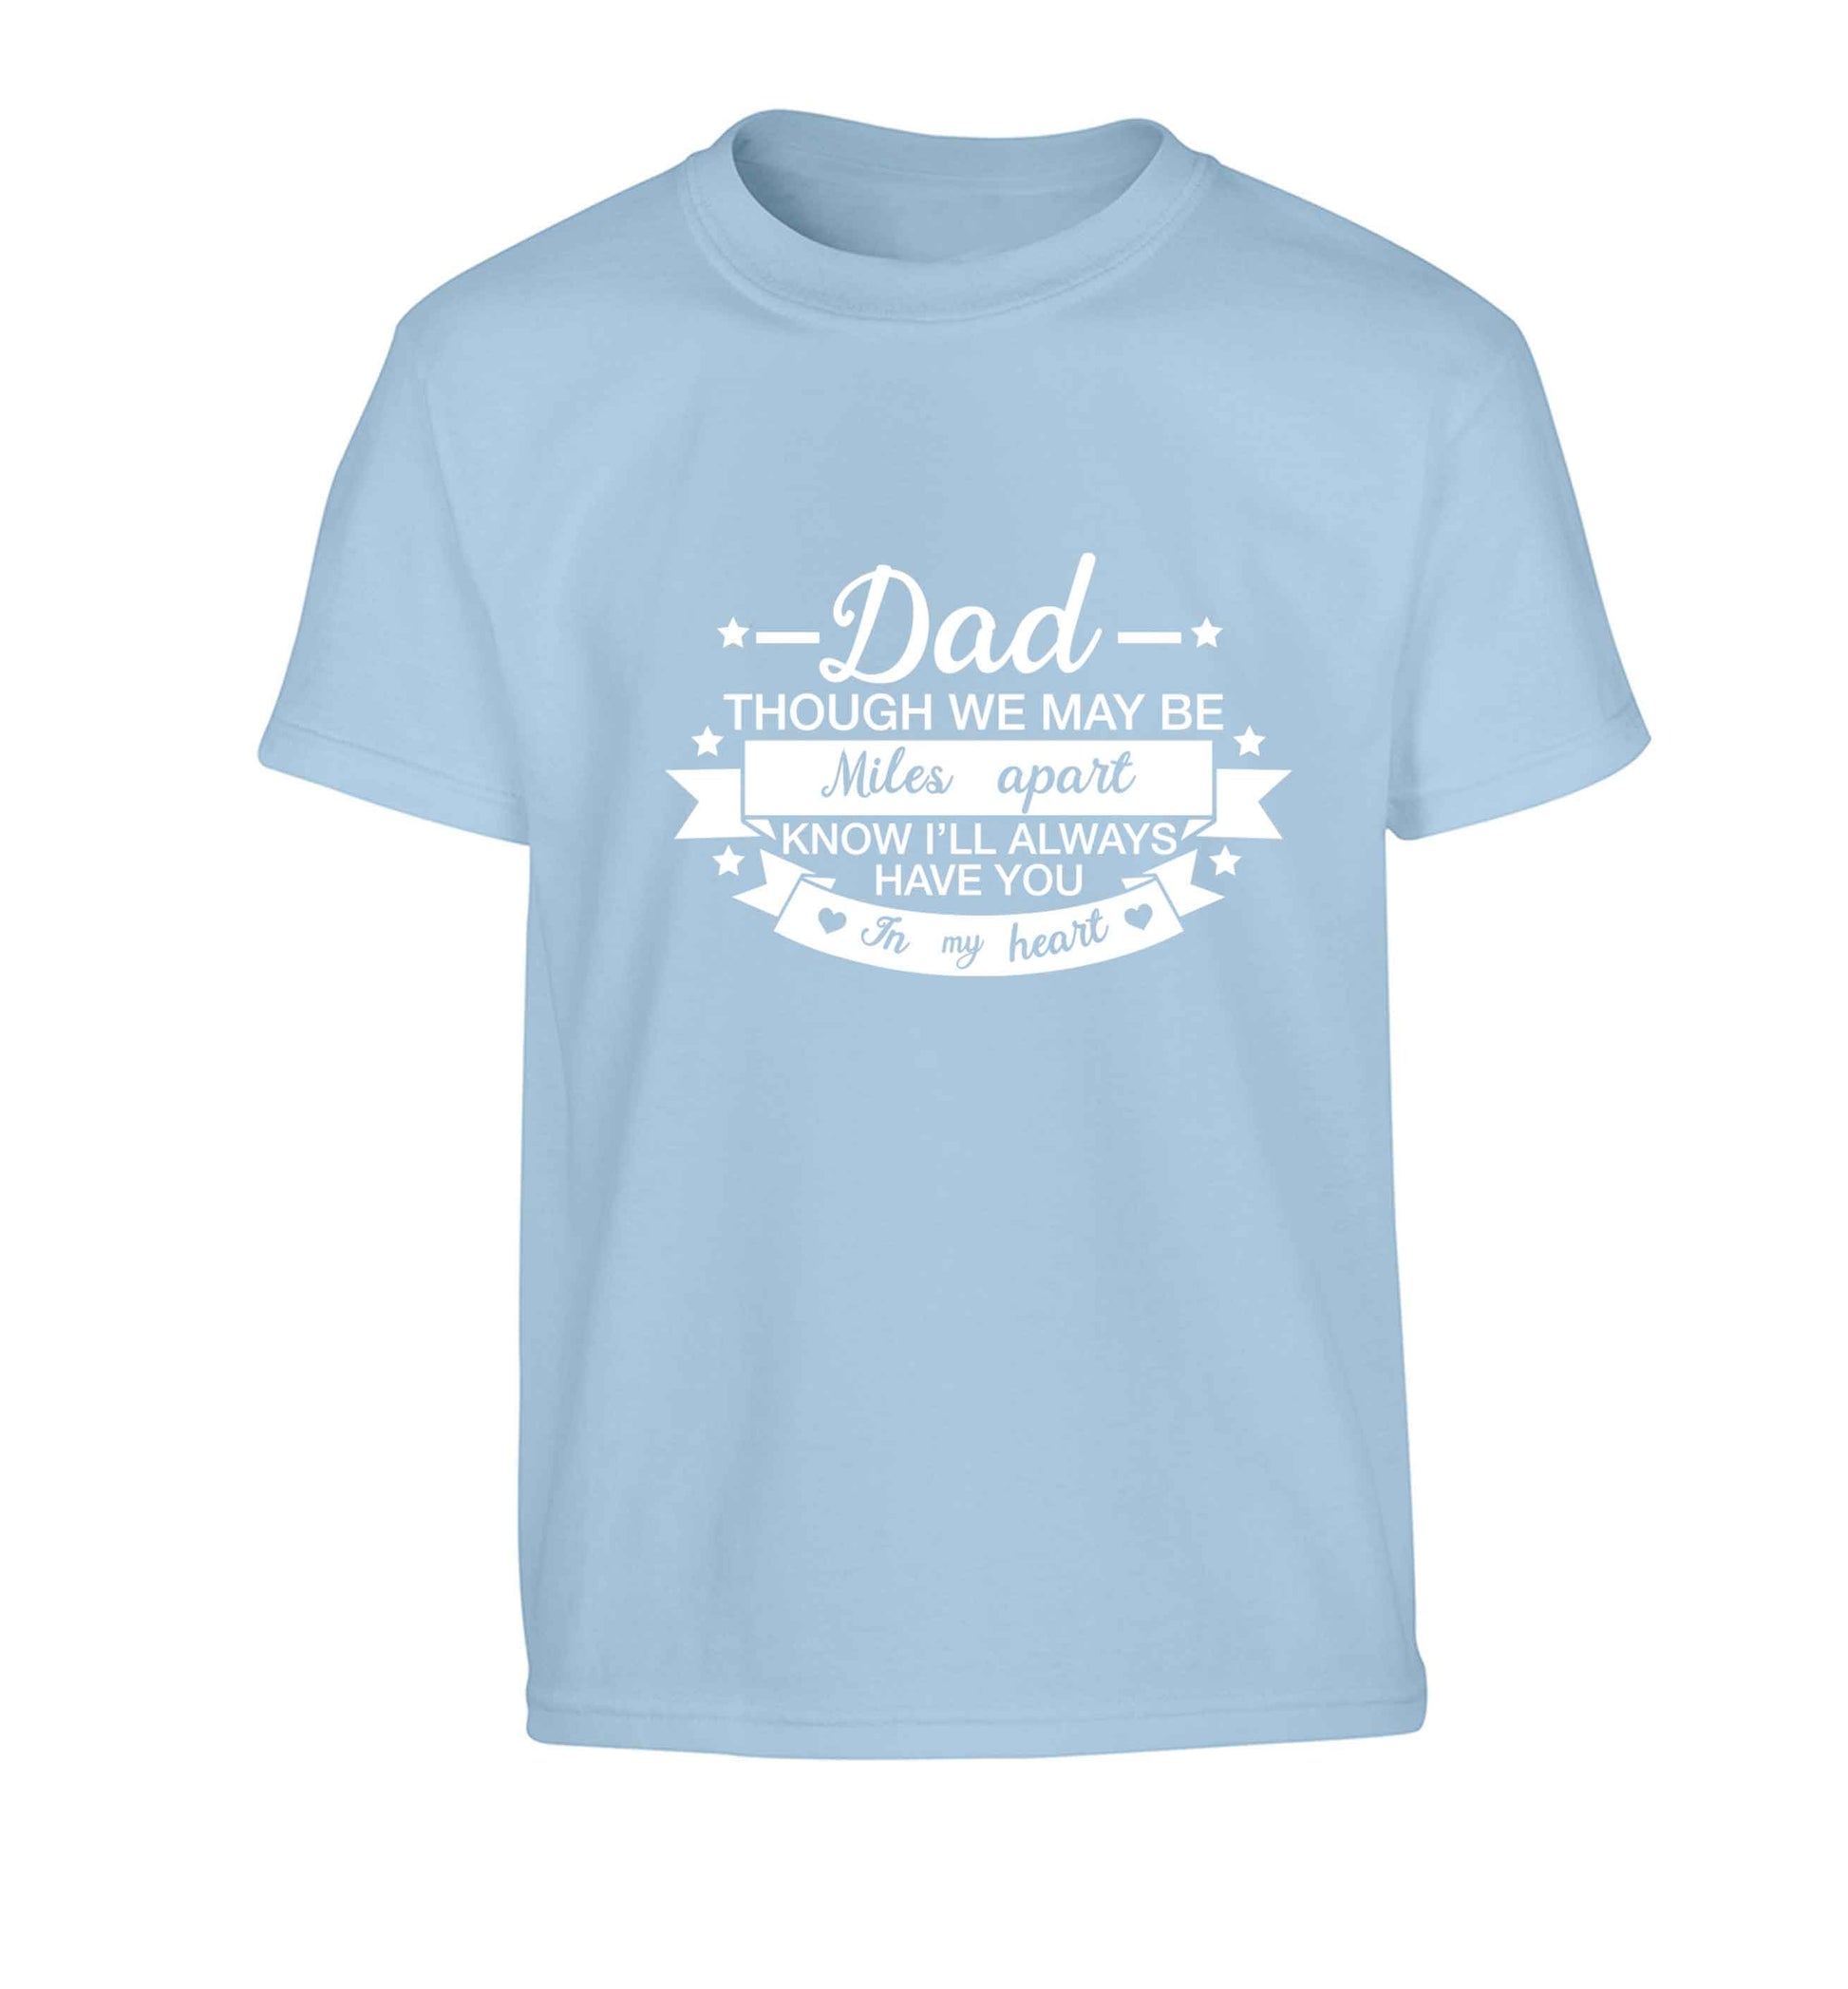 Dad though we are miles apart know I'll always have you in my heart Children's light blue Tshirt 12-13 Years